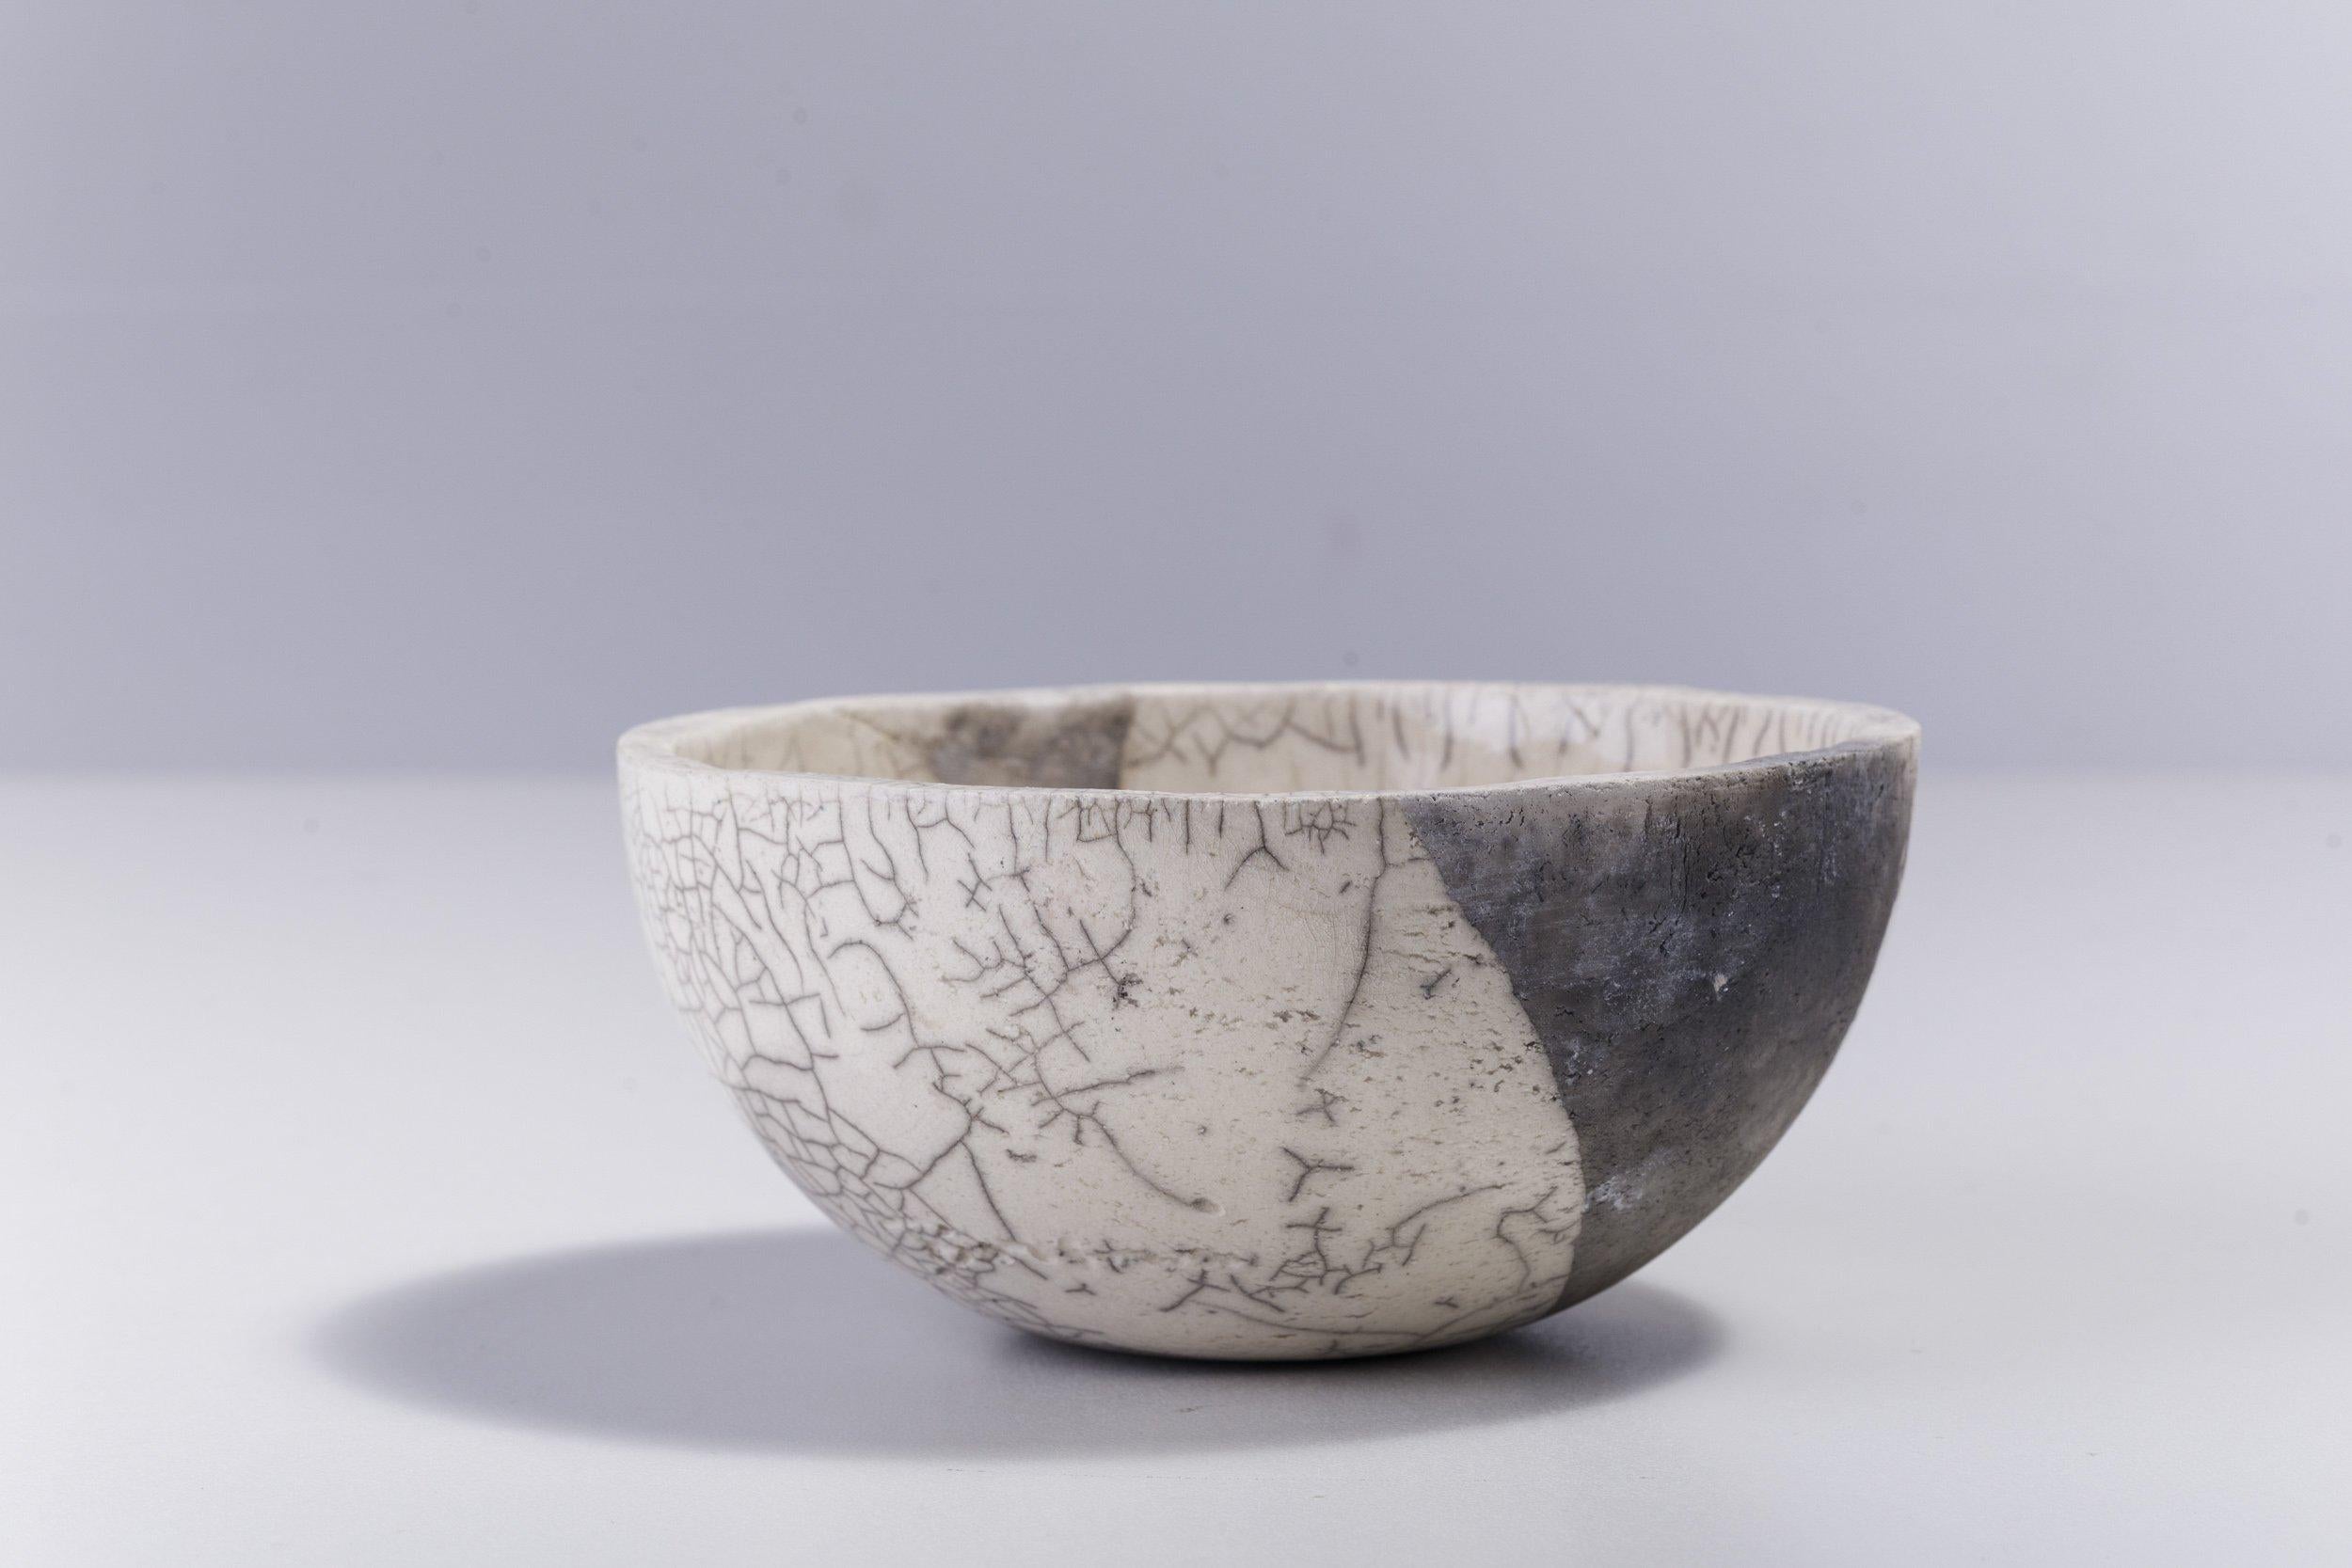 Fringe chawan bowl

Irregular, dramatic gray cracks of bold visual impact embellish the polished ceramic surface of this spectacular chawan bowl, handcrafted following the ancient Japanese technique of Raku. A perfect complement to any decor, it